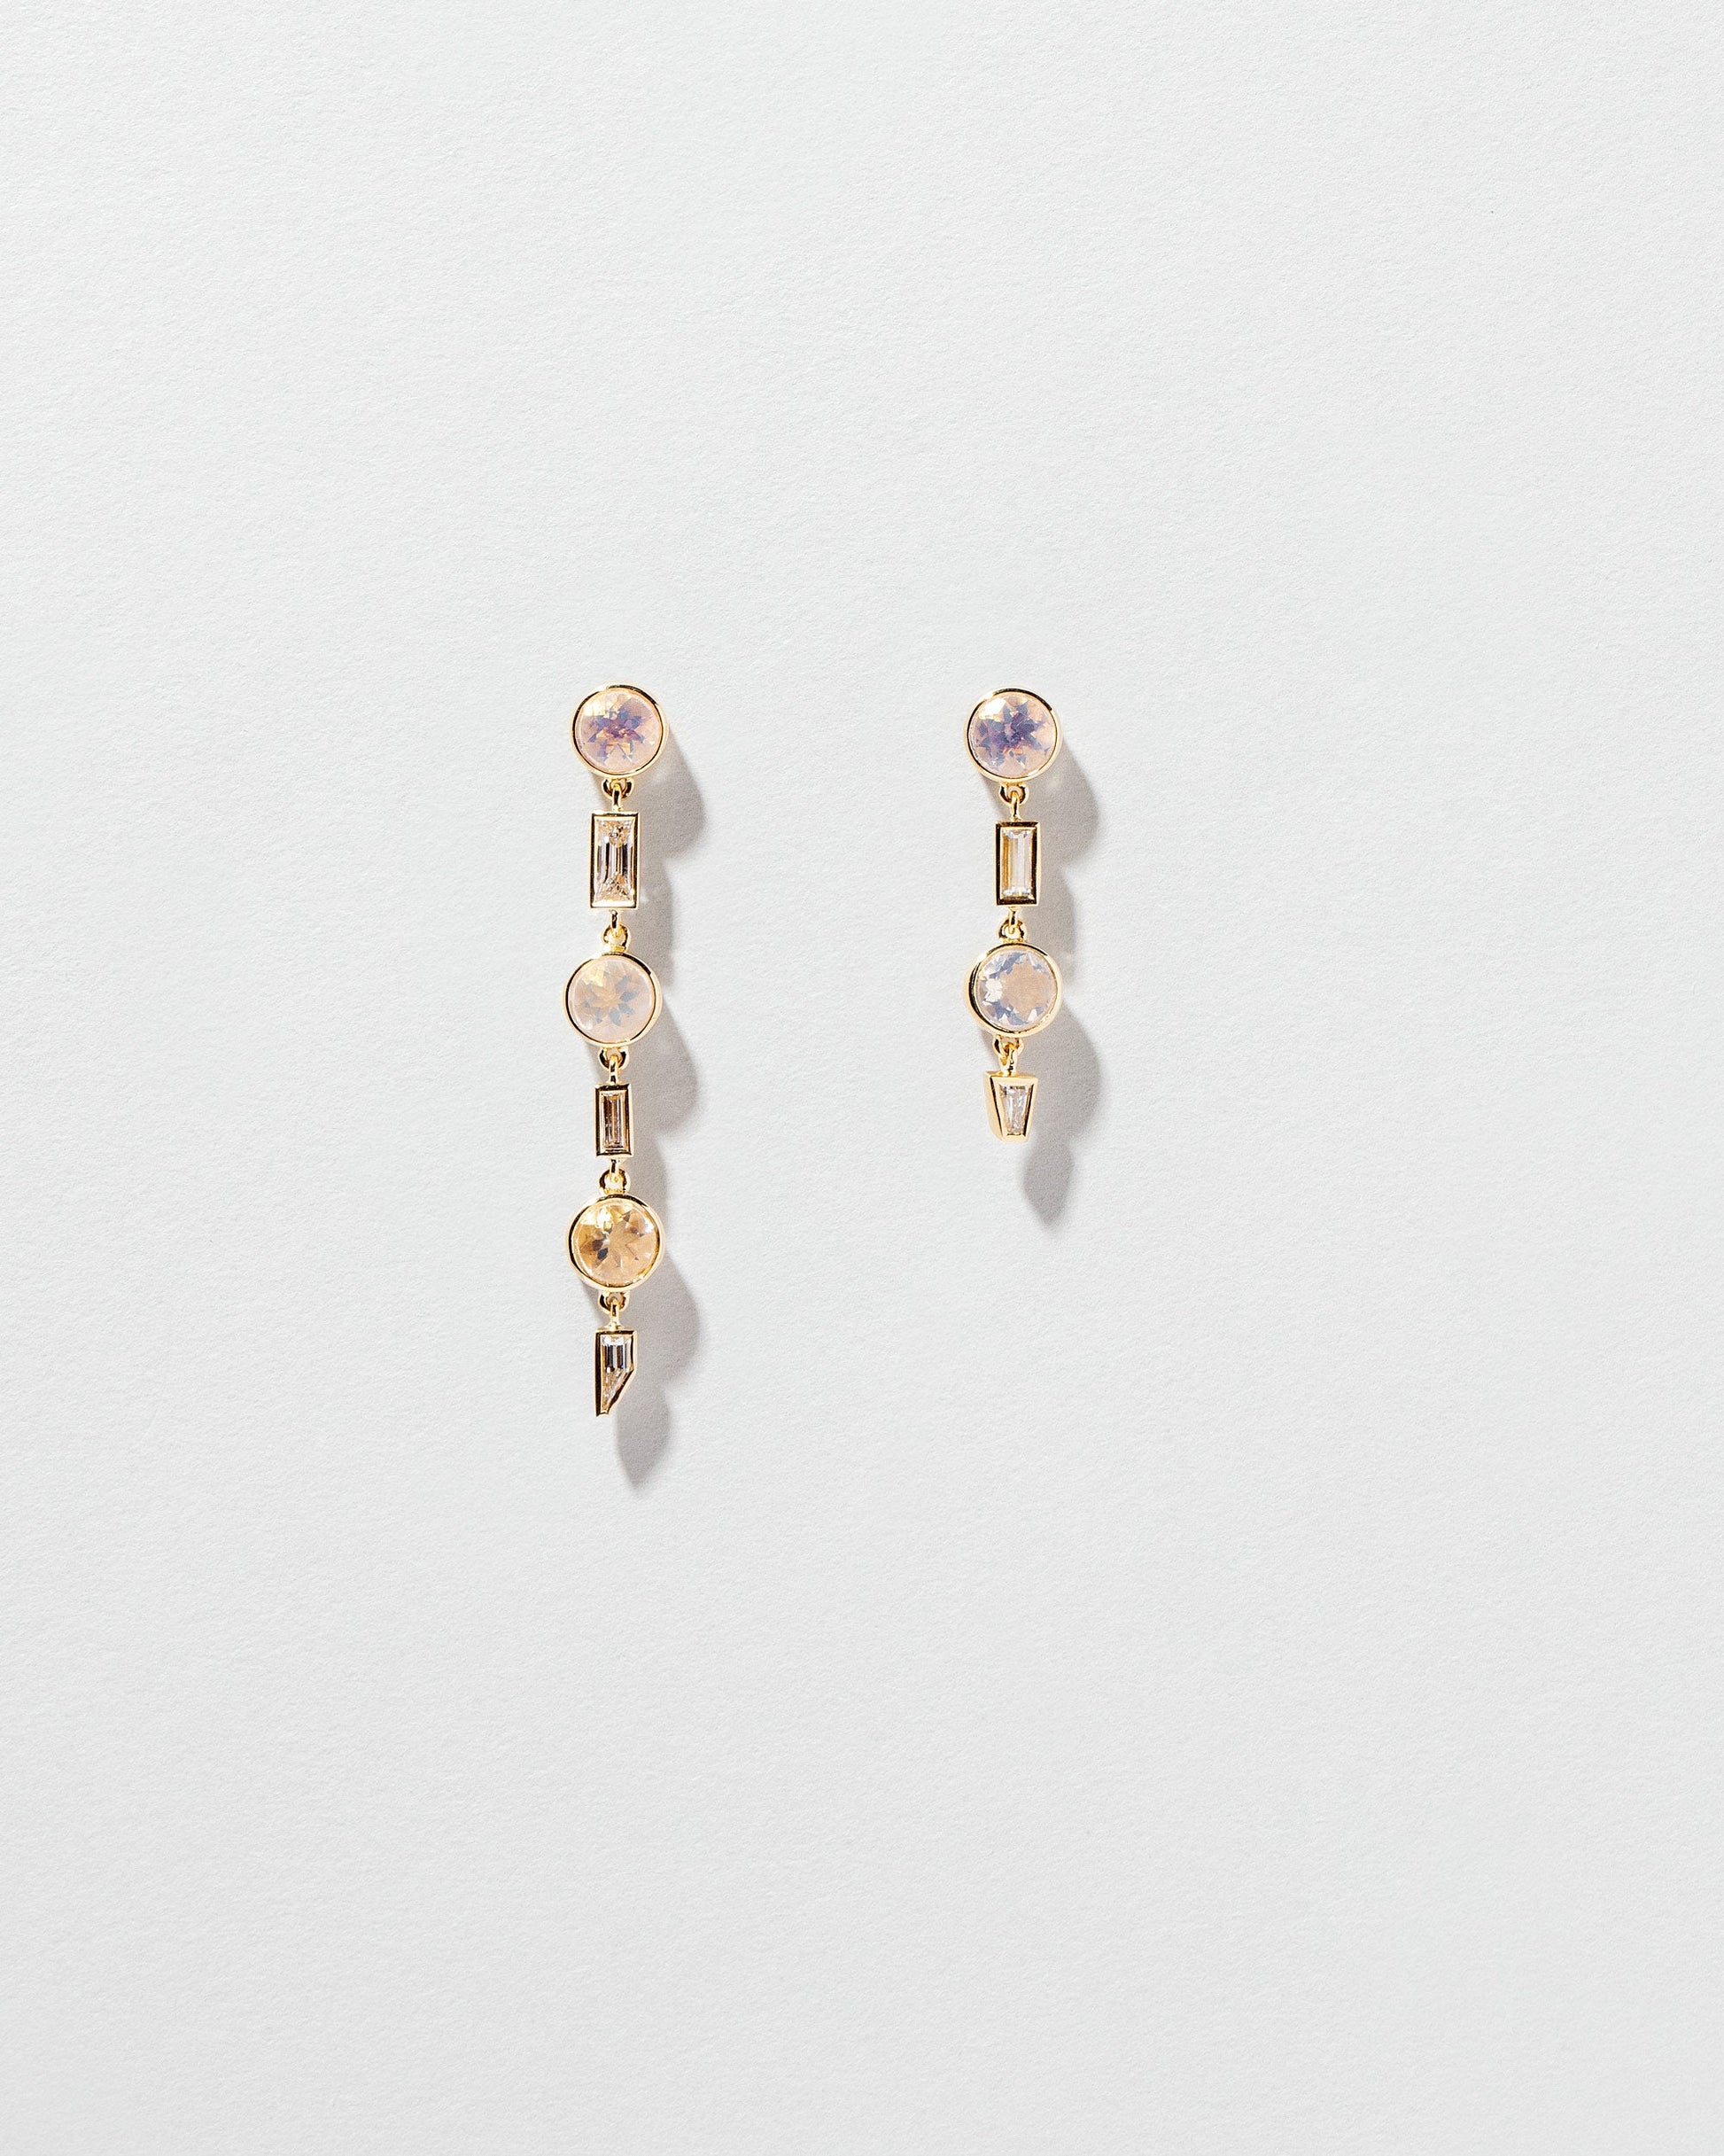  Opalescence Earrings on light color background.